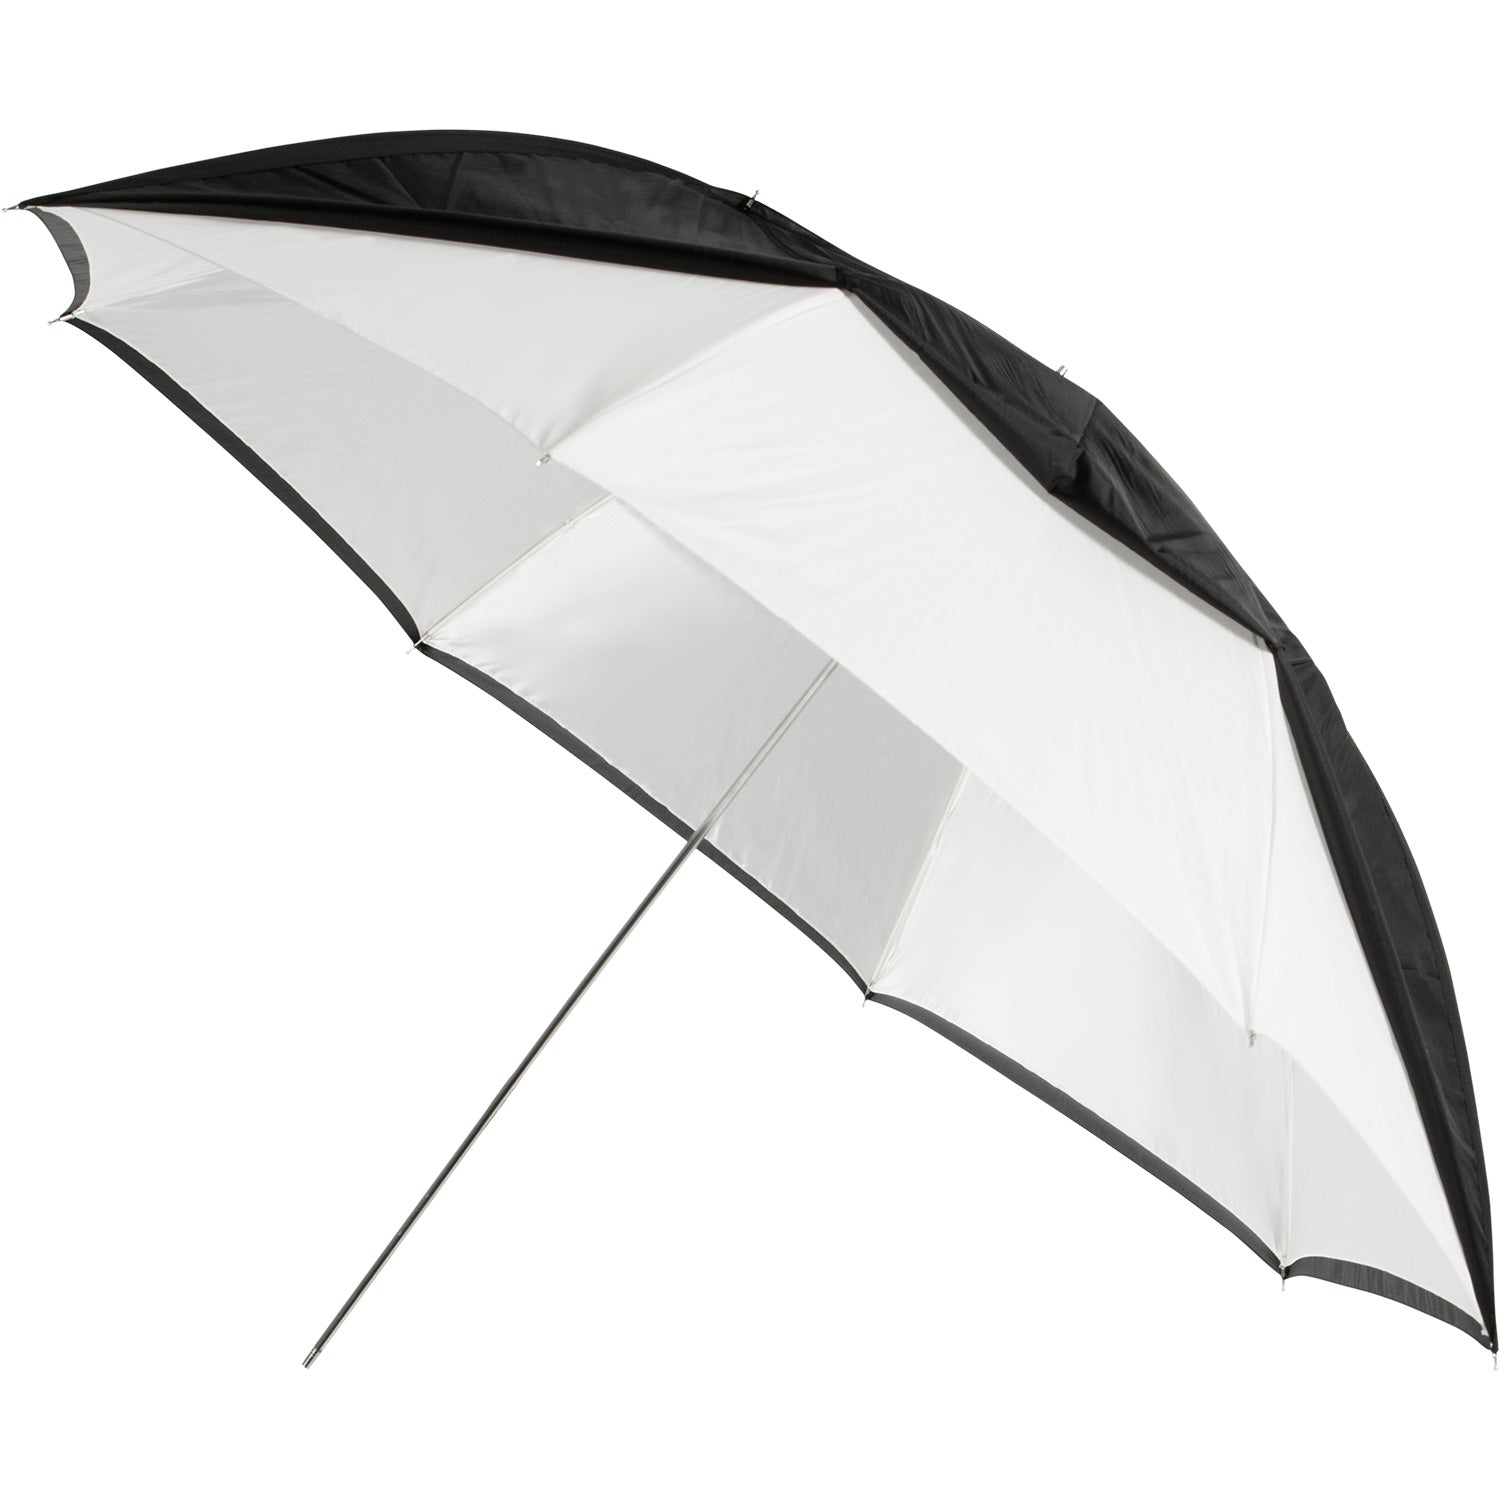 Convertible Umbrella - Optical White Satin with Removable Black Cover (60